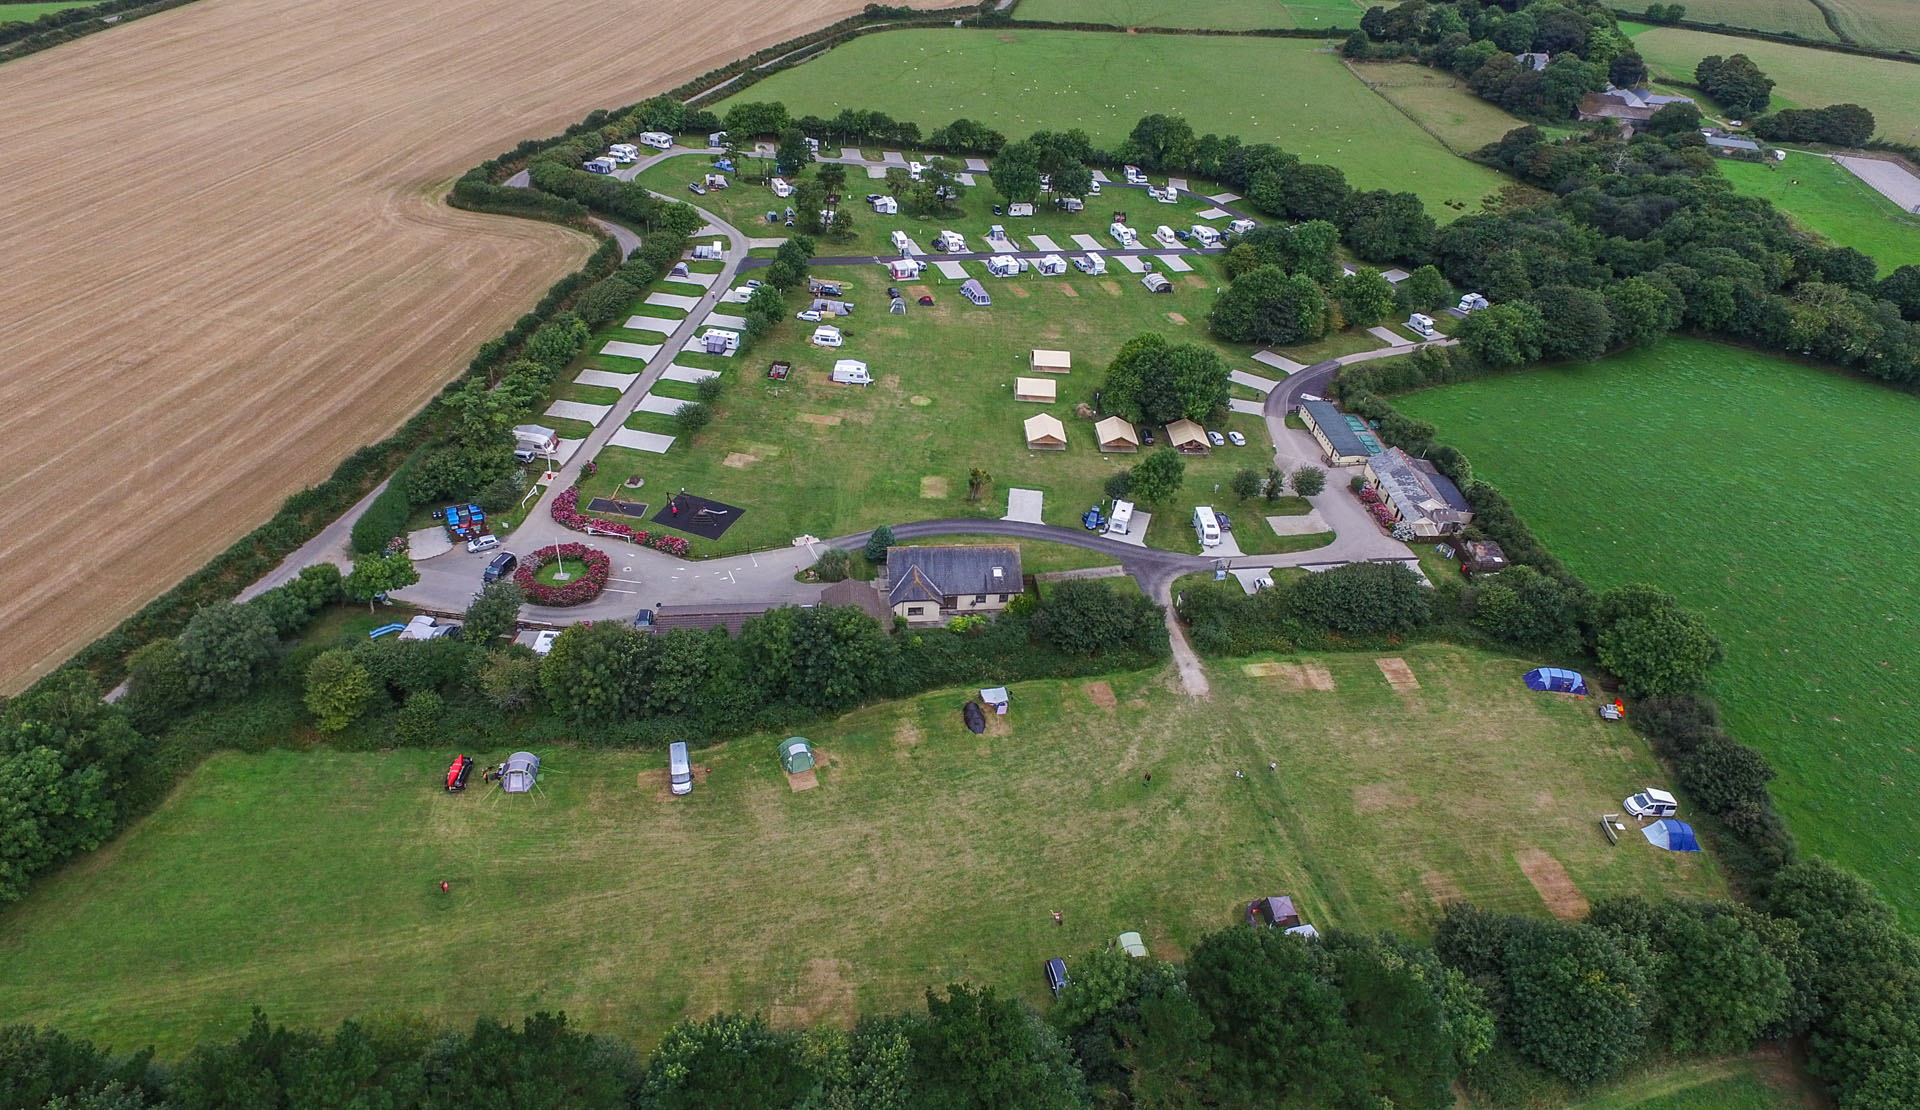 Veryan - Camping and Caravanning Club Site - The Camping and Caravanning Club